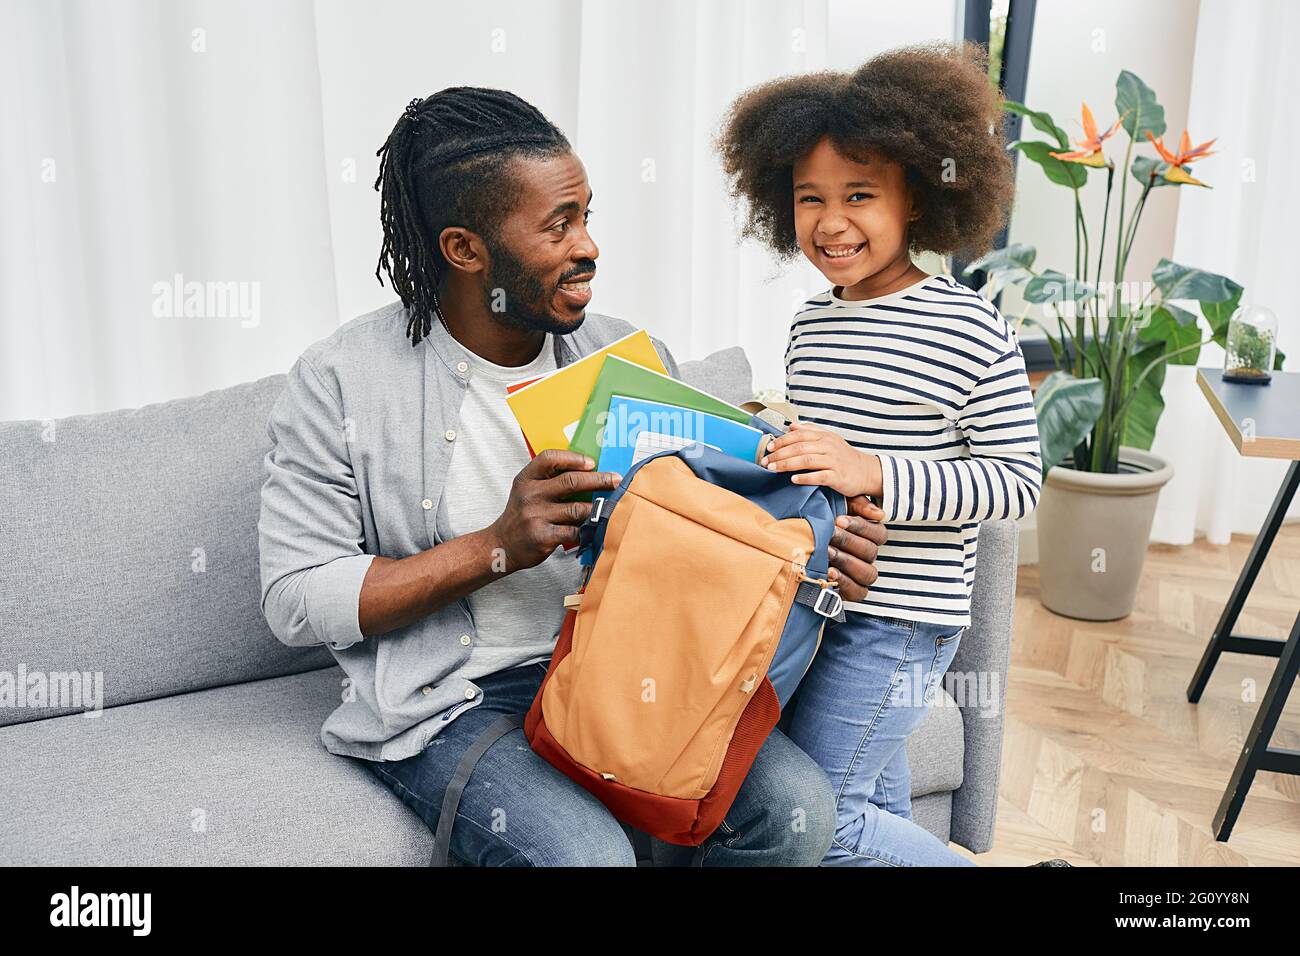 Father's Day. Father helps daughter to put color copybooks in school bag before her first school day. Happy fatherhood Stock Photo